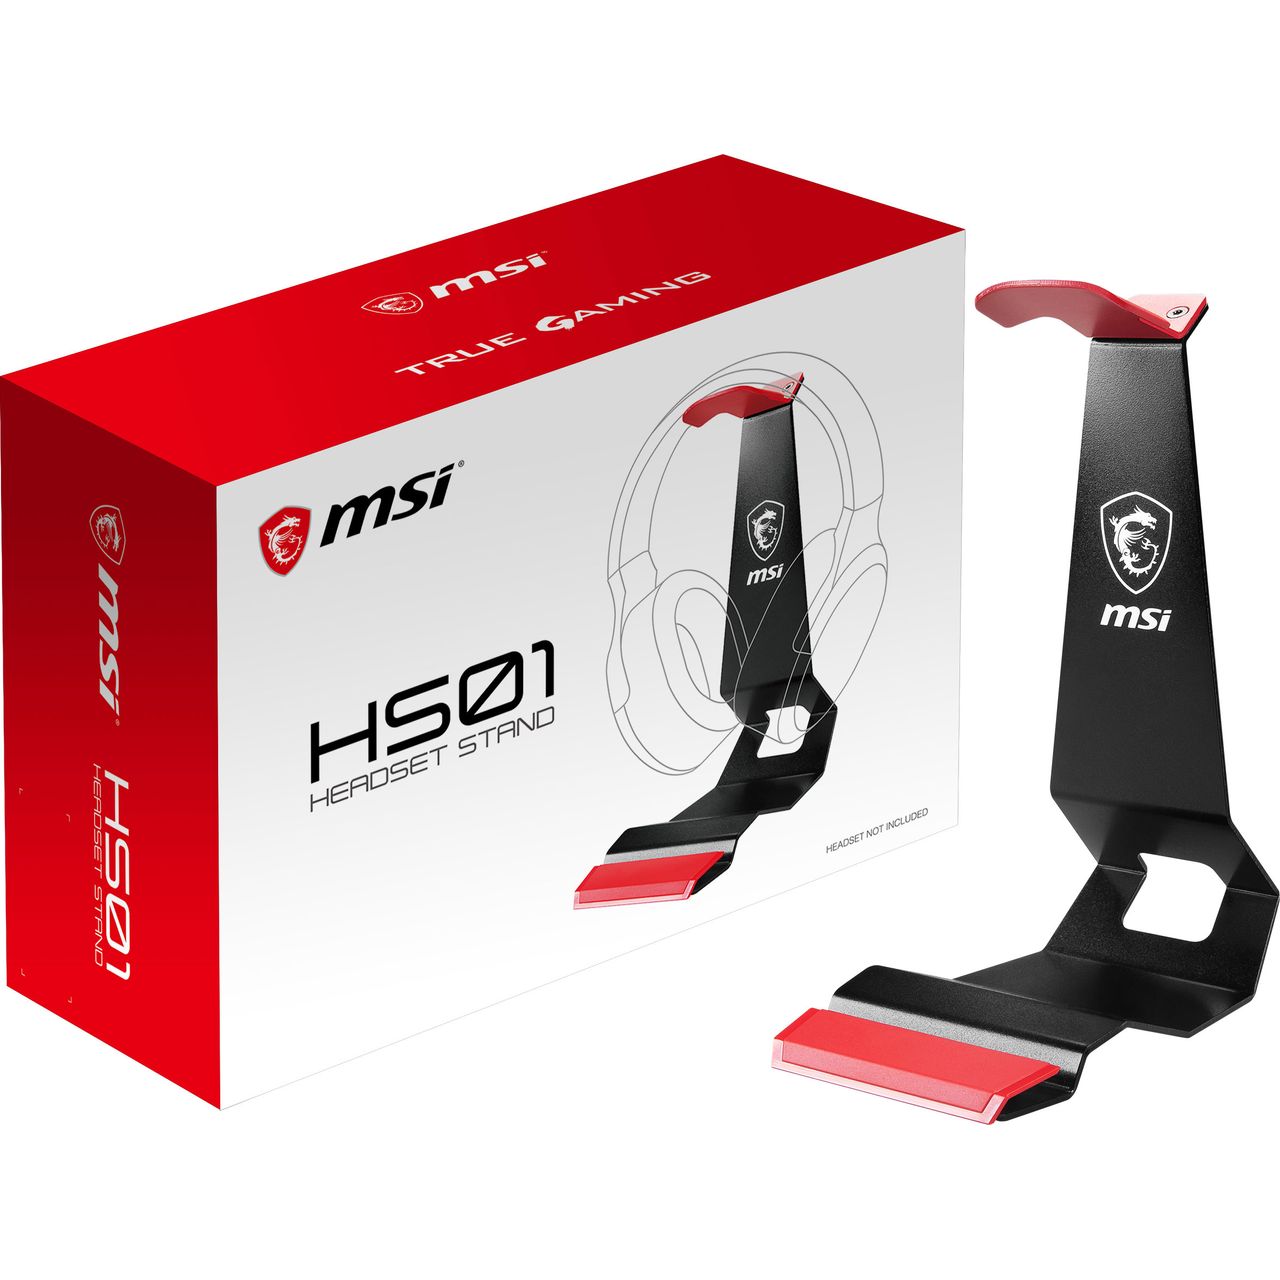 MSI HS01 Gaming Headset Stand Review